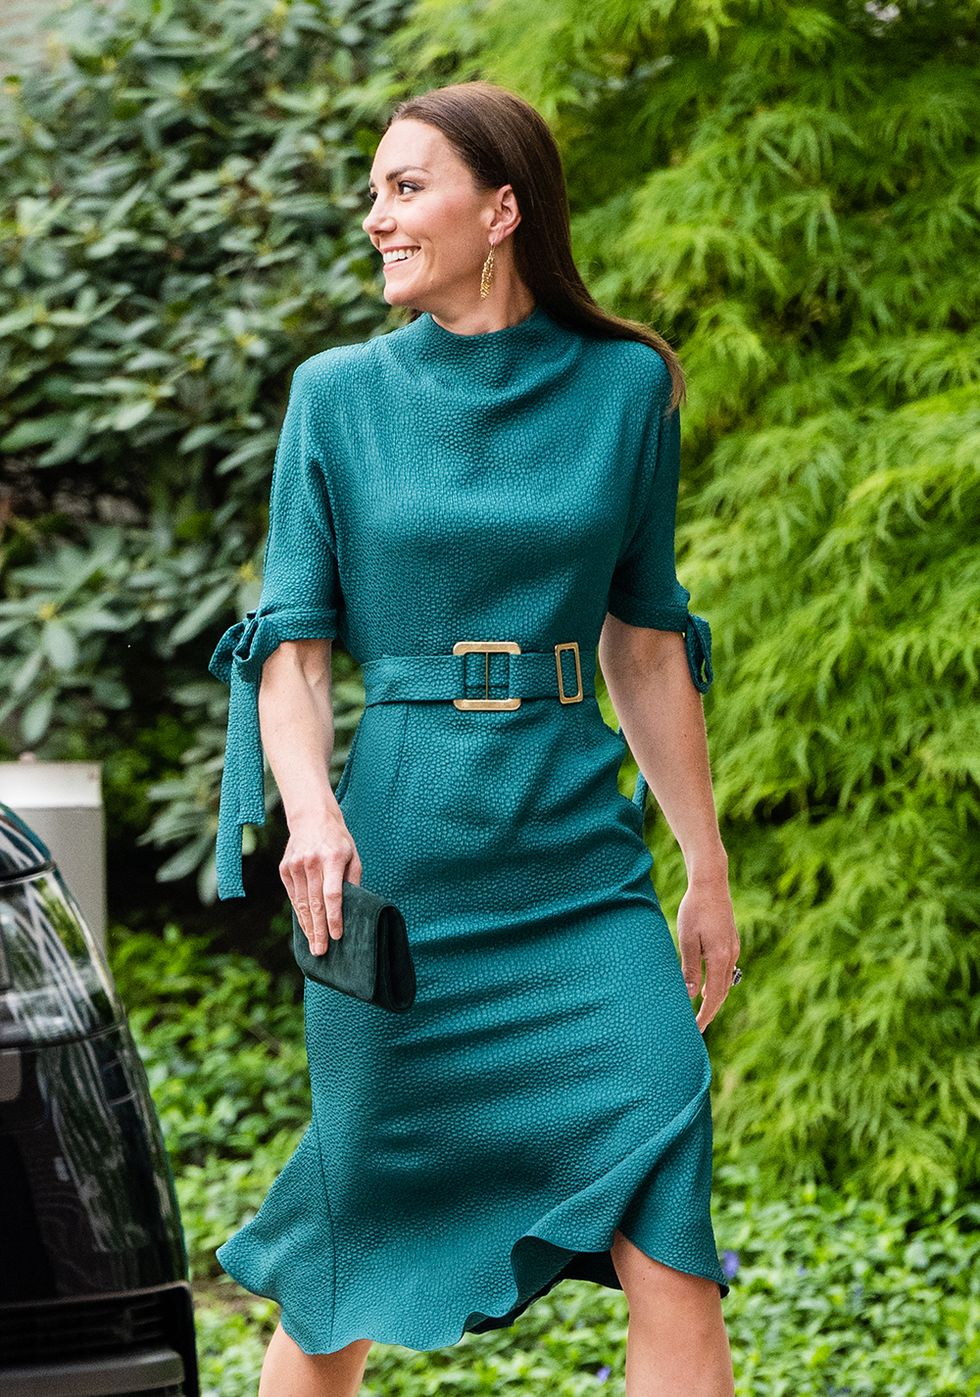 Kate Middleton makes a statement in stunning green belted dress at